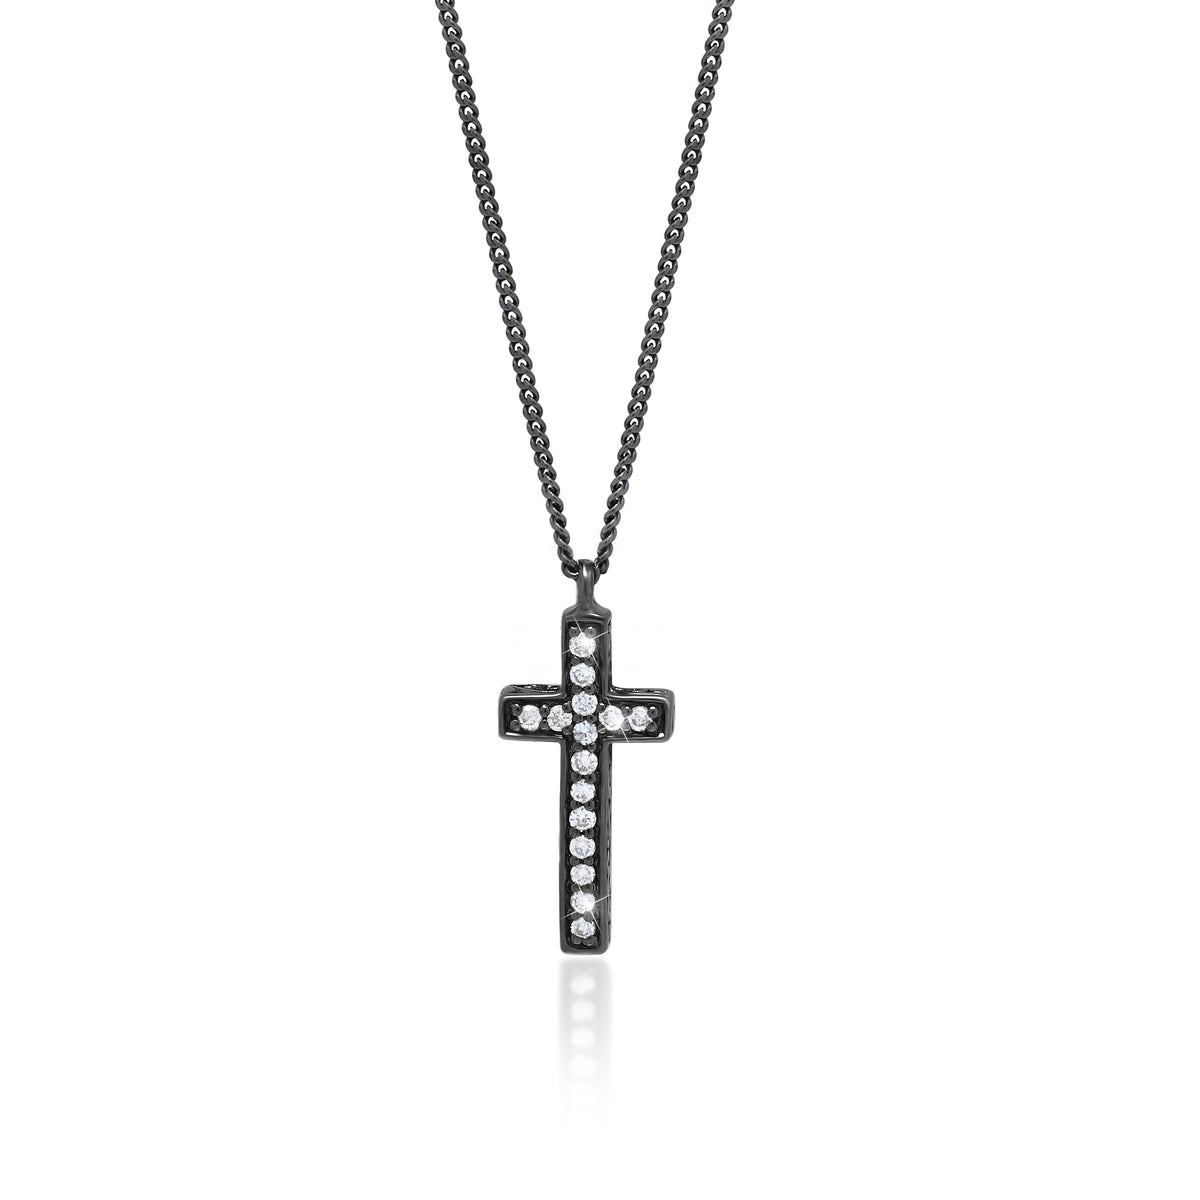 White Diamond Cross Pendant Necklace in Black Rhodium Plated Sterling Silver